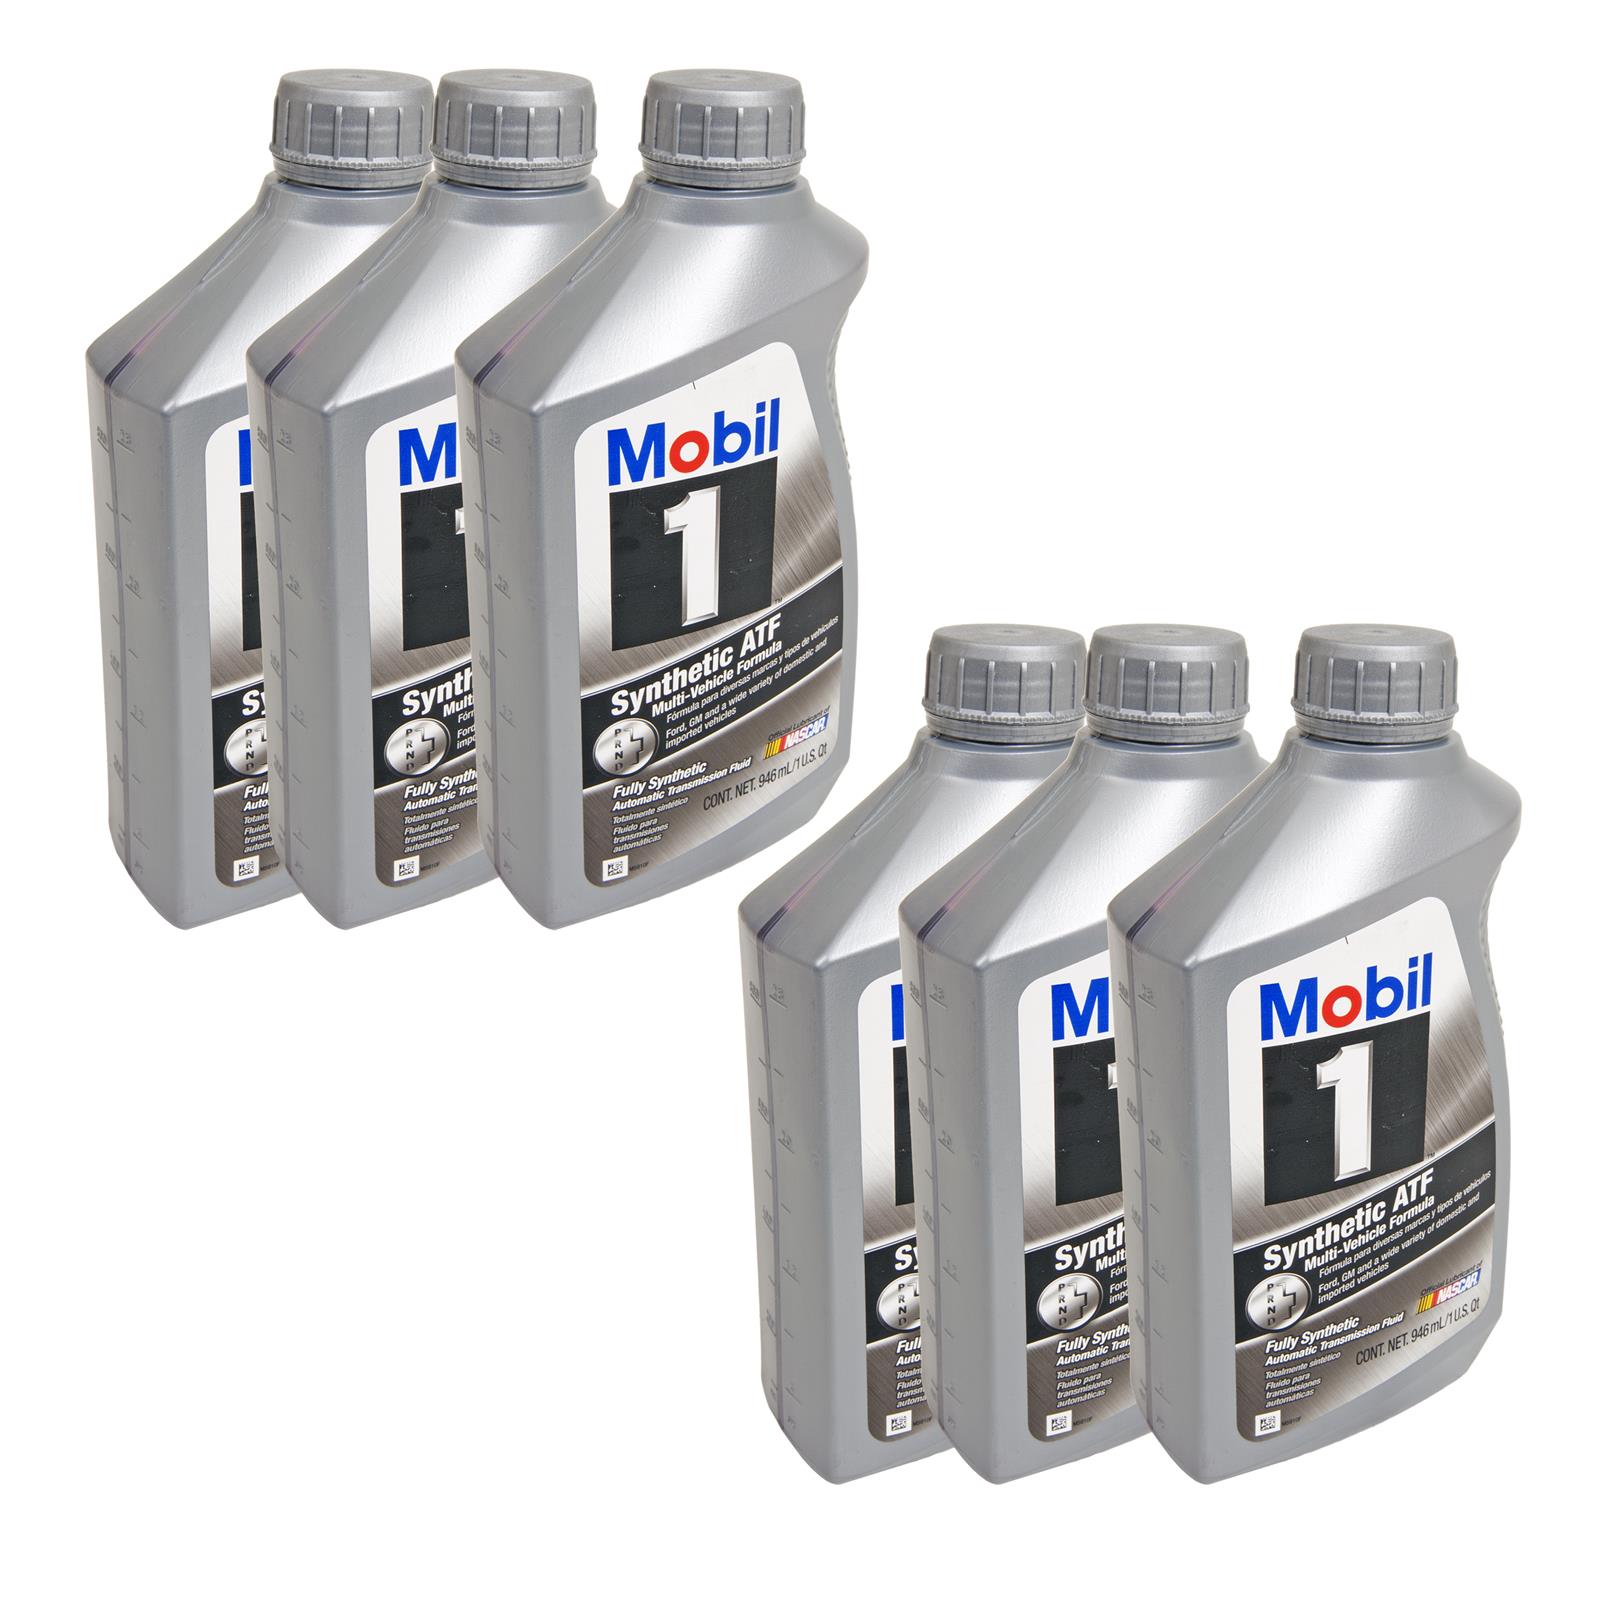 Mobil 1 atf. Mobil 1 Synthetic АТФ. Mobil 1 Synthetic ATF 0.946Л. Mobil 1 SAIC-GM. Mobil1 1992 года.